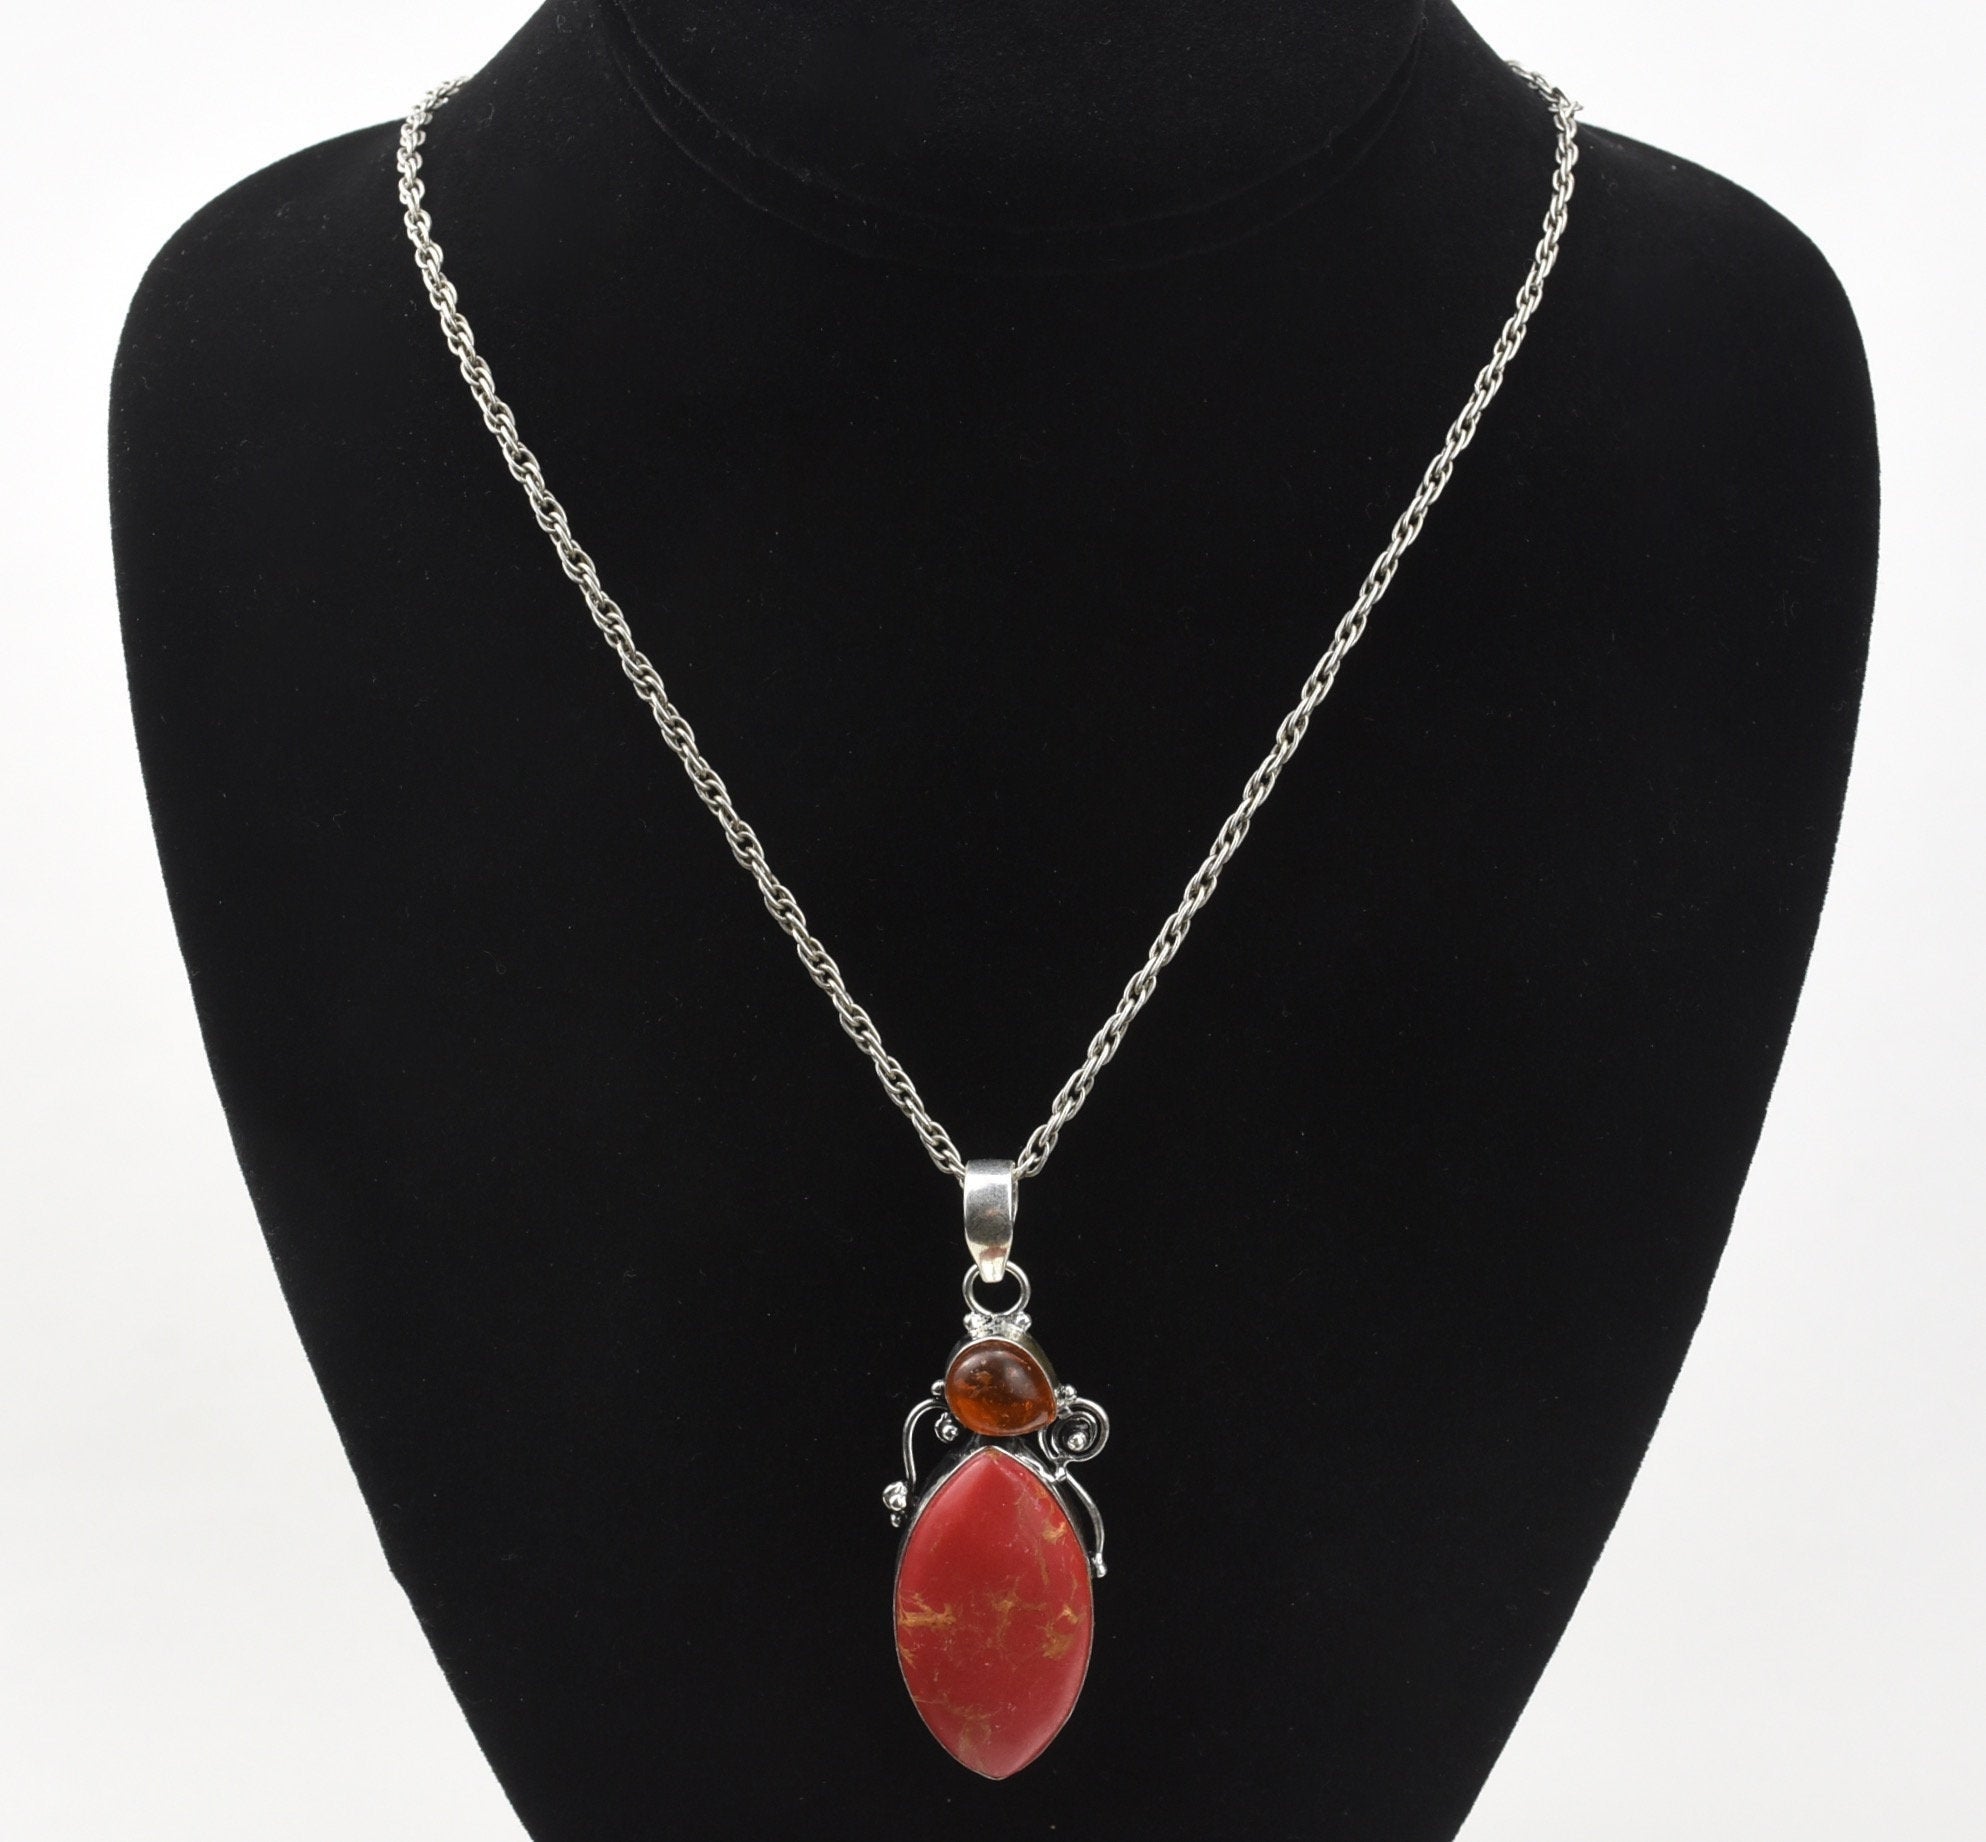 Imperial Red Jasper and Amber Pendant on Sterling Silver Chain Necklace